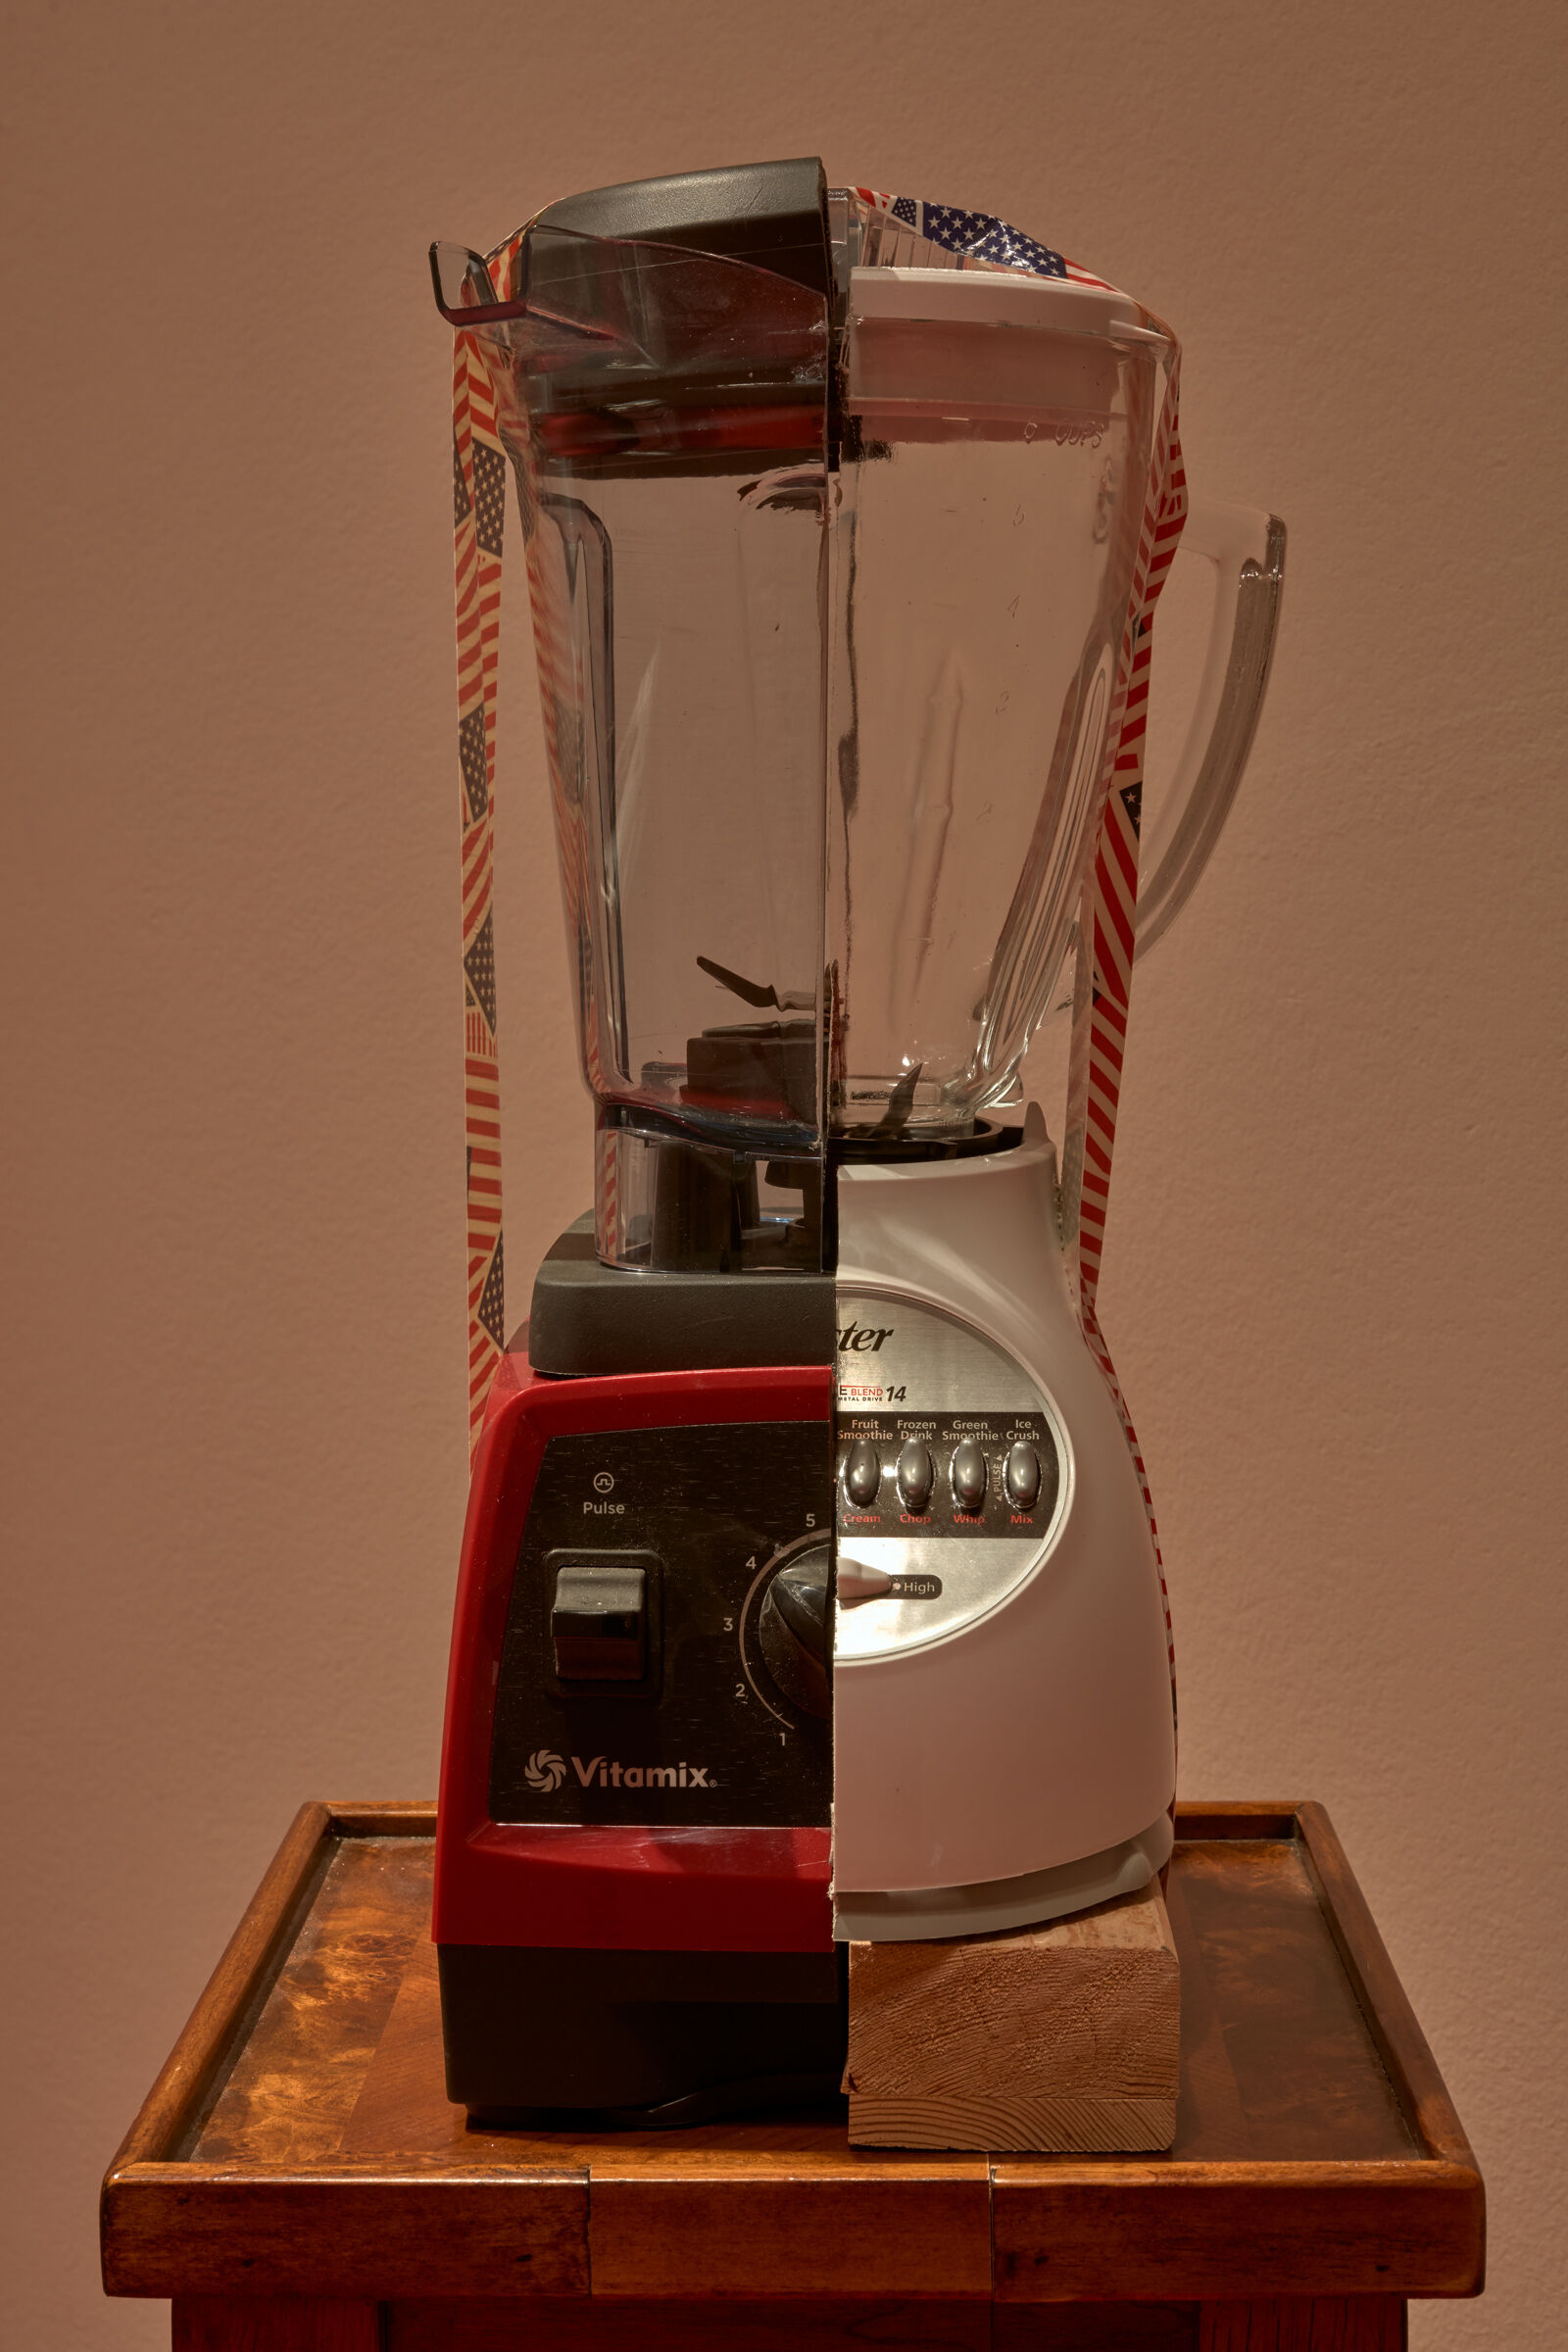 Half of two different blenders pushed together to make one new blender. 